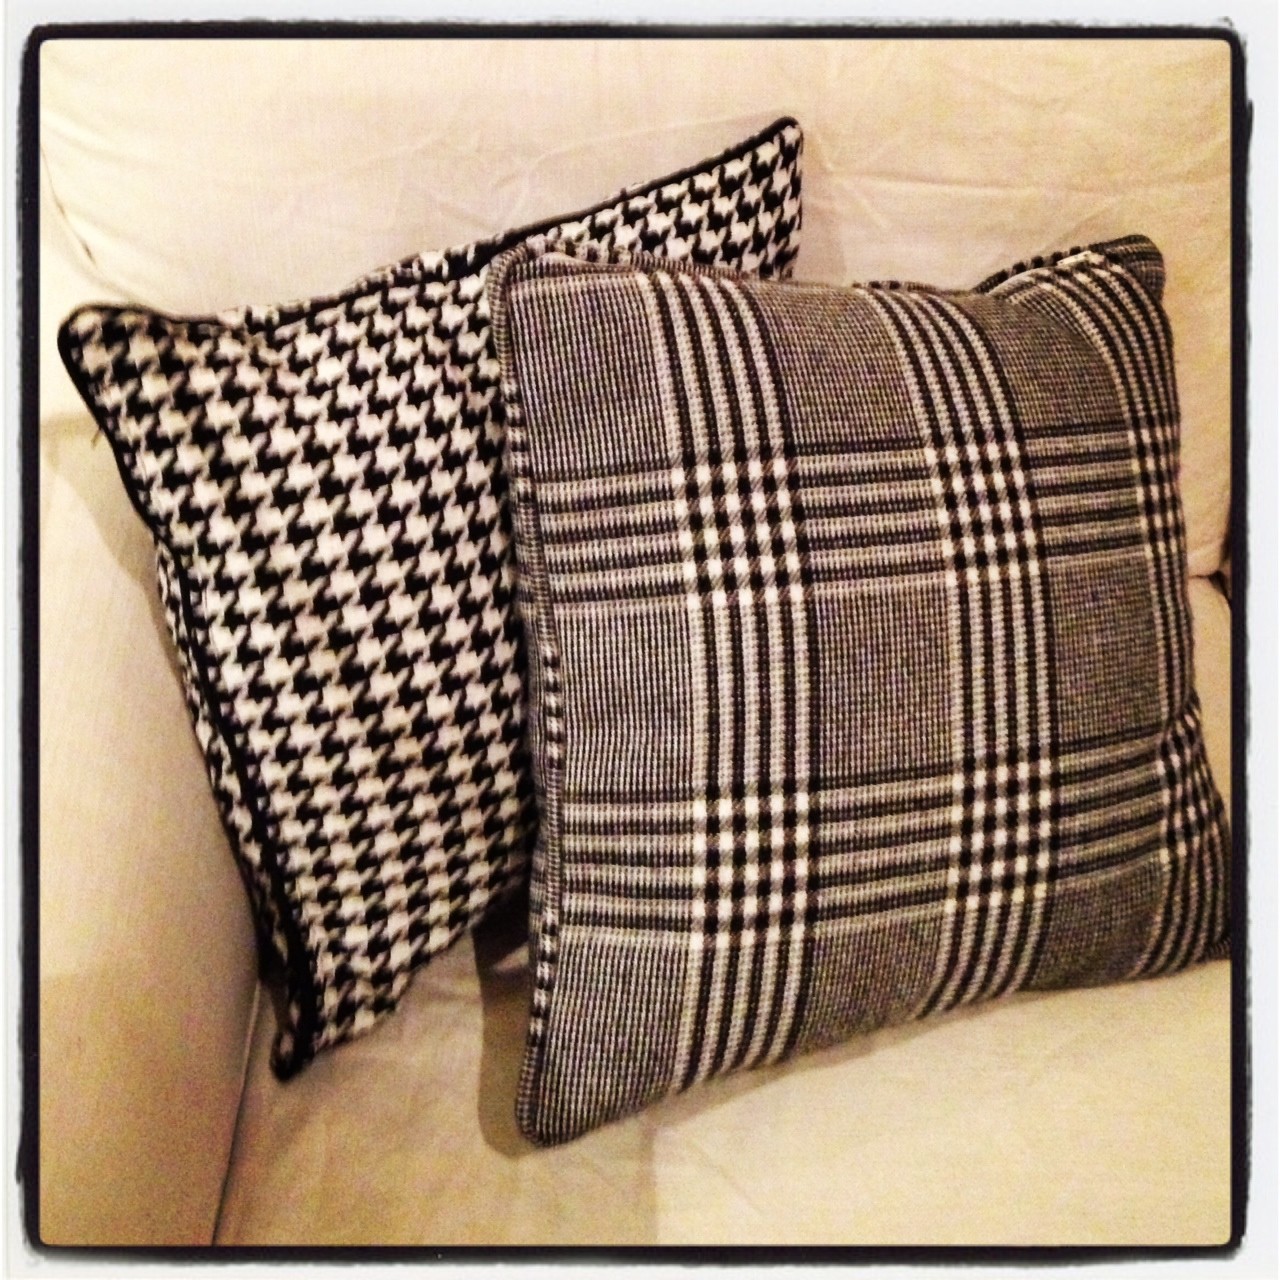 Bespoke suits and Cushions too!